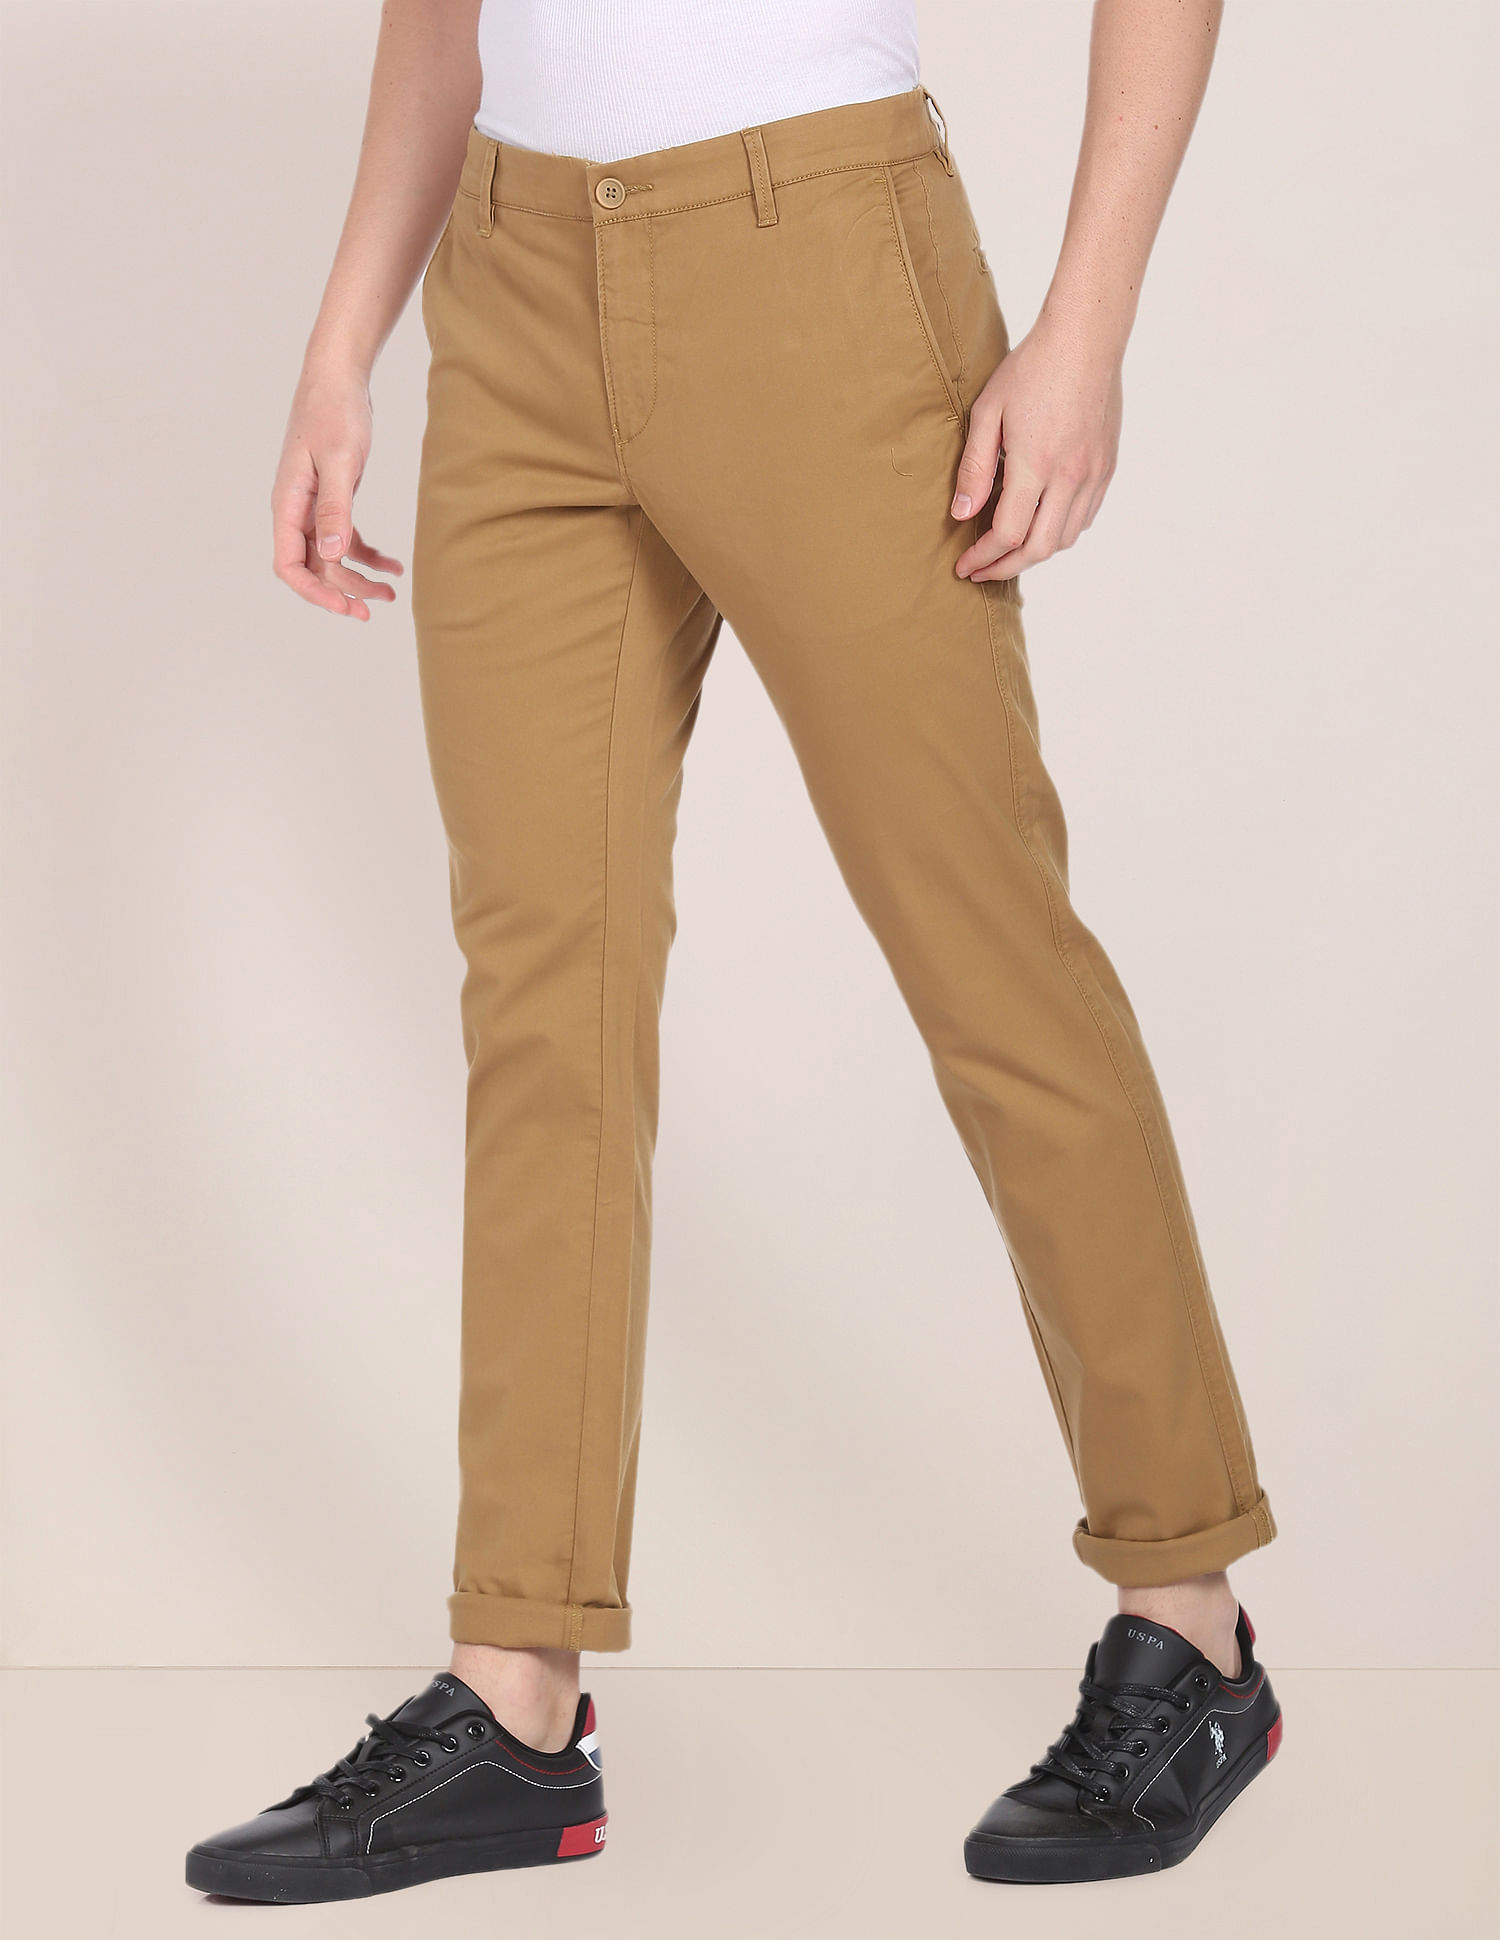 Buy U.S. Polo Assn. Flat Front Solid Casual Trousers - NNNOW.com